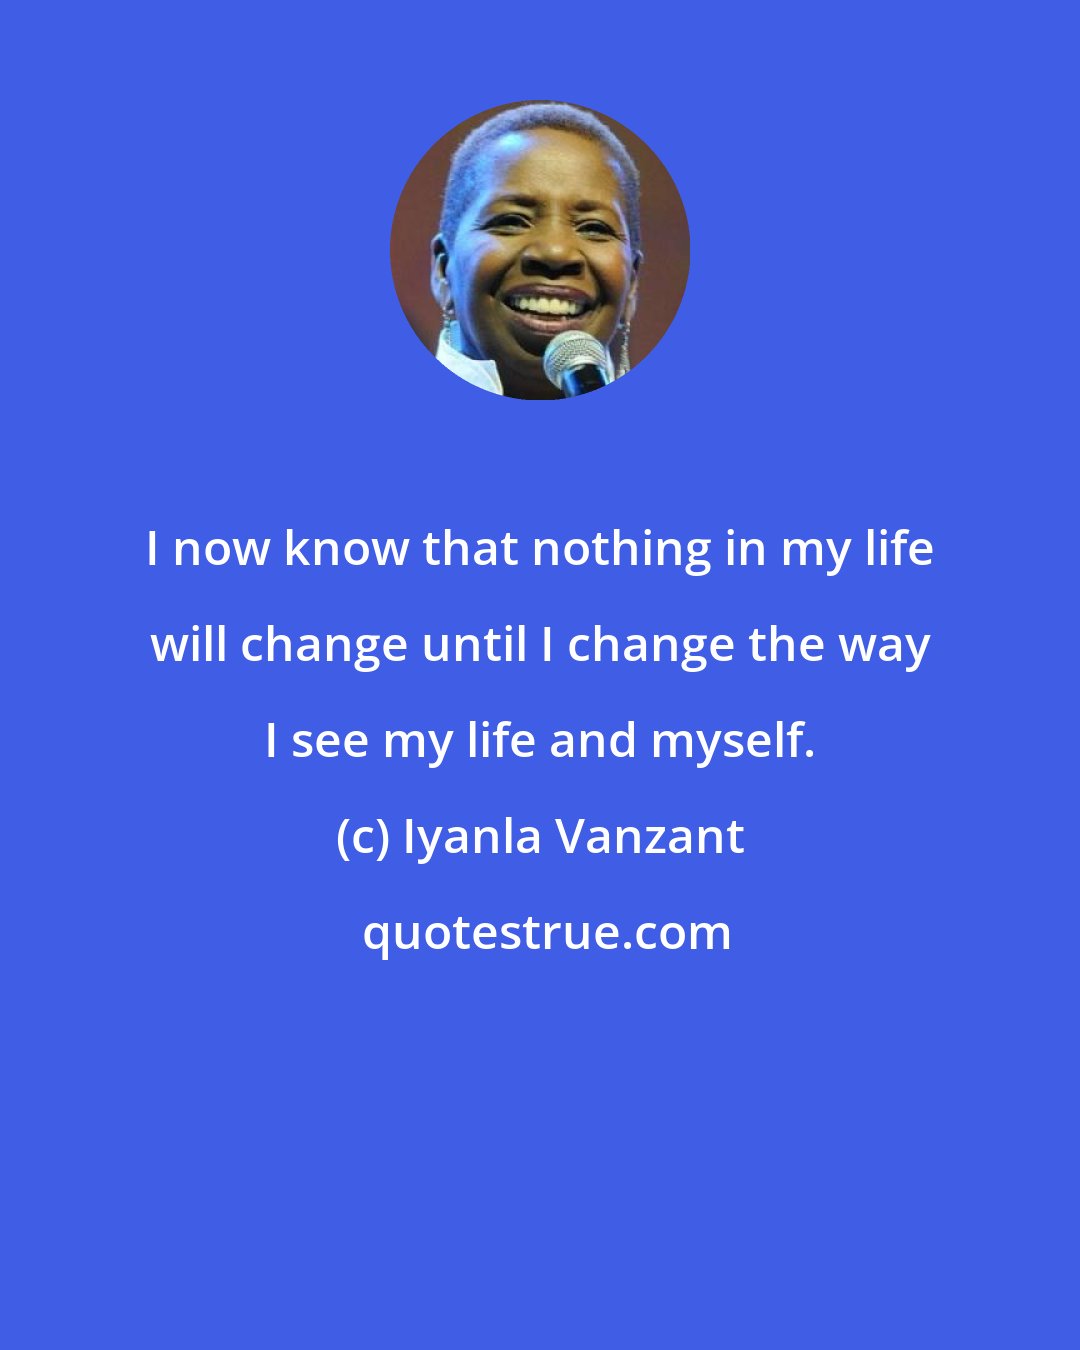 Iyanla Vanzant: I now know that nothing in my life will change until I change the way I see my life and myself.